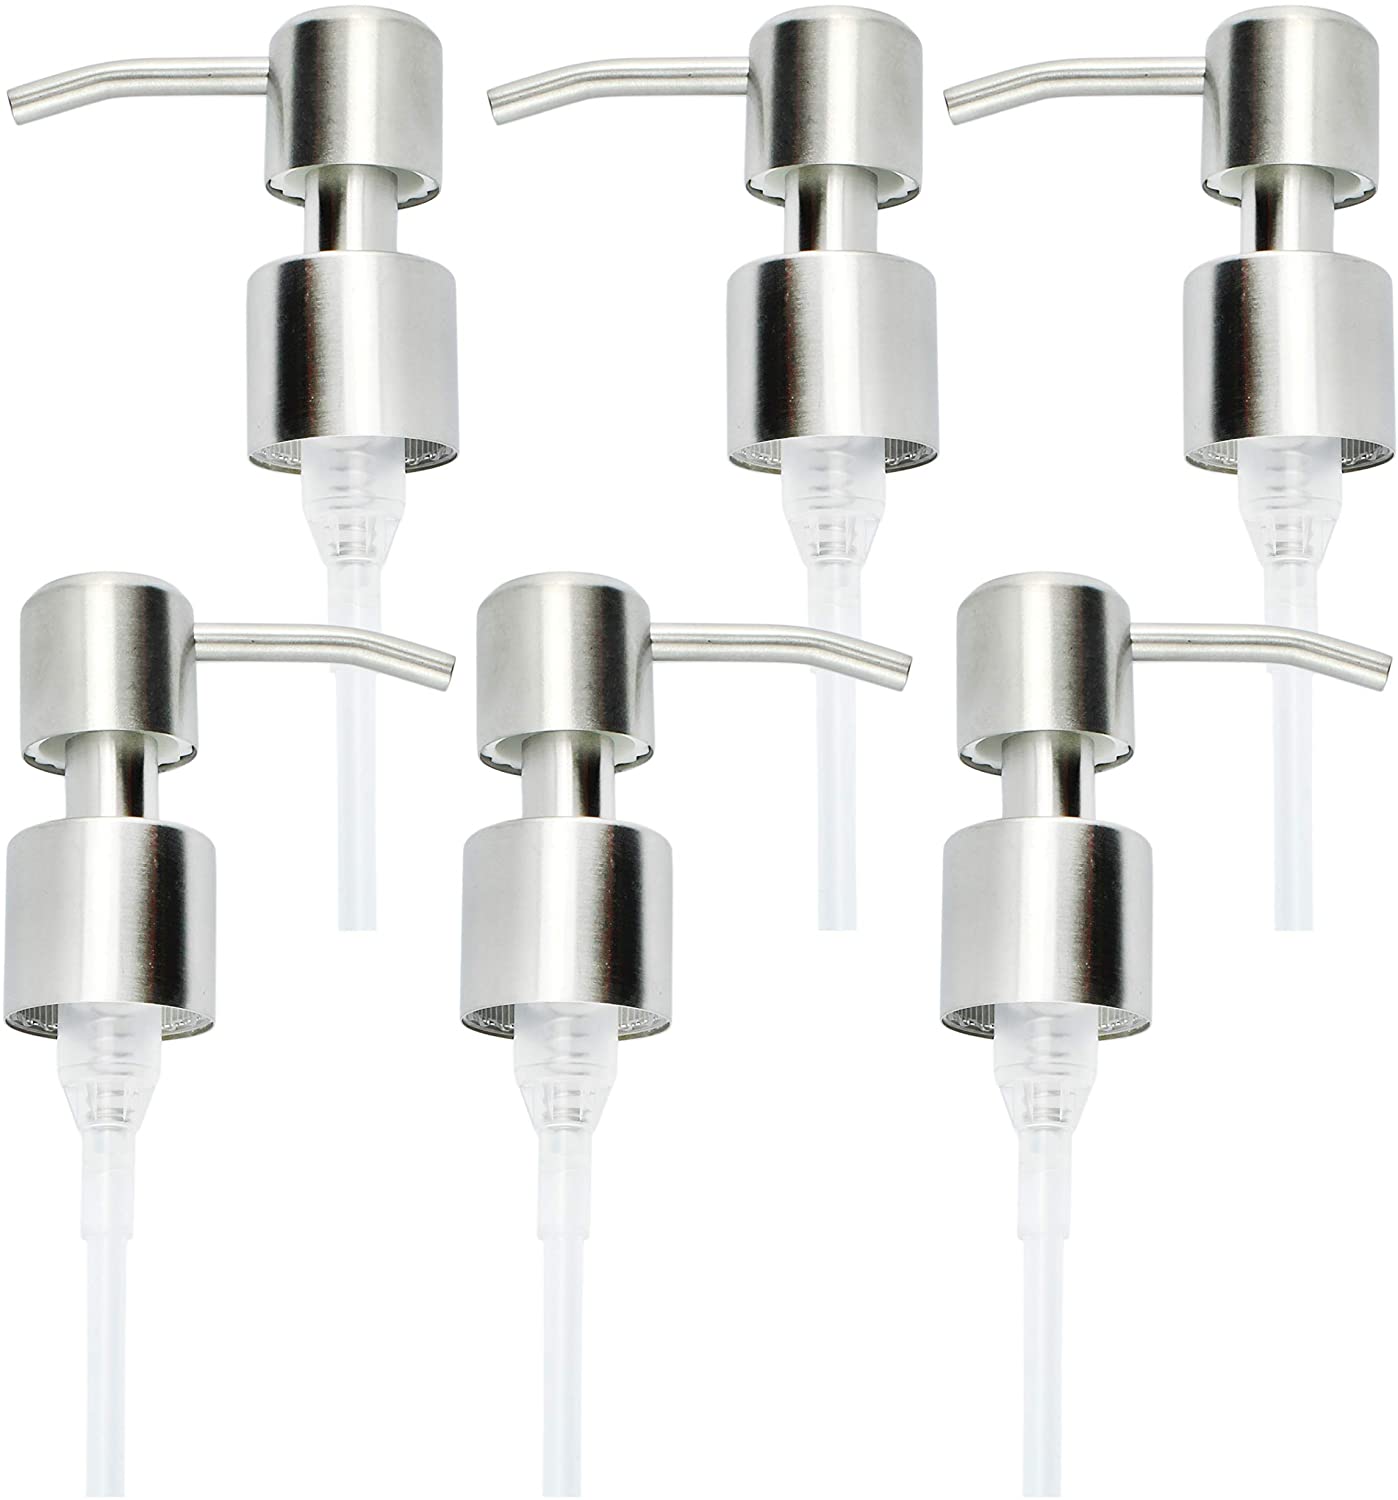 Replacement Lotion Pump Parts, 24mm (6 Pack, Brushed Silver) - sh1880cb024mm